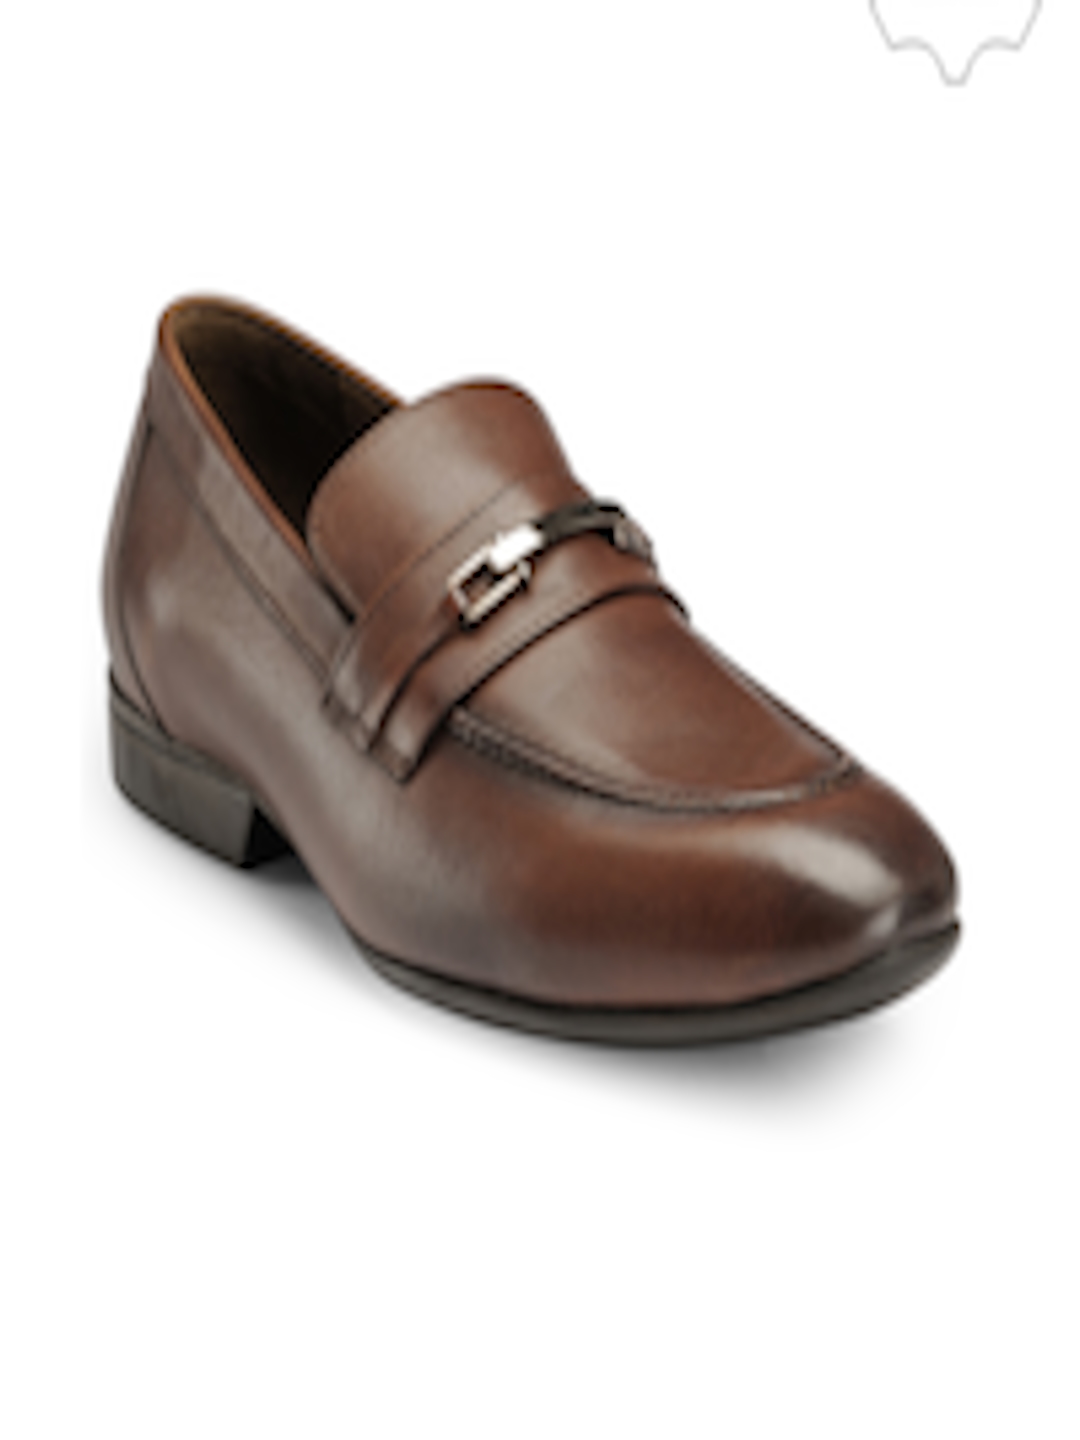 Buy Teakwood Leathers Men Brown Genuine Leather Loafers - Casual Shoes ...